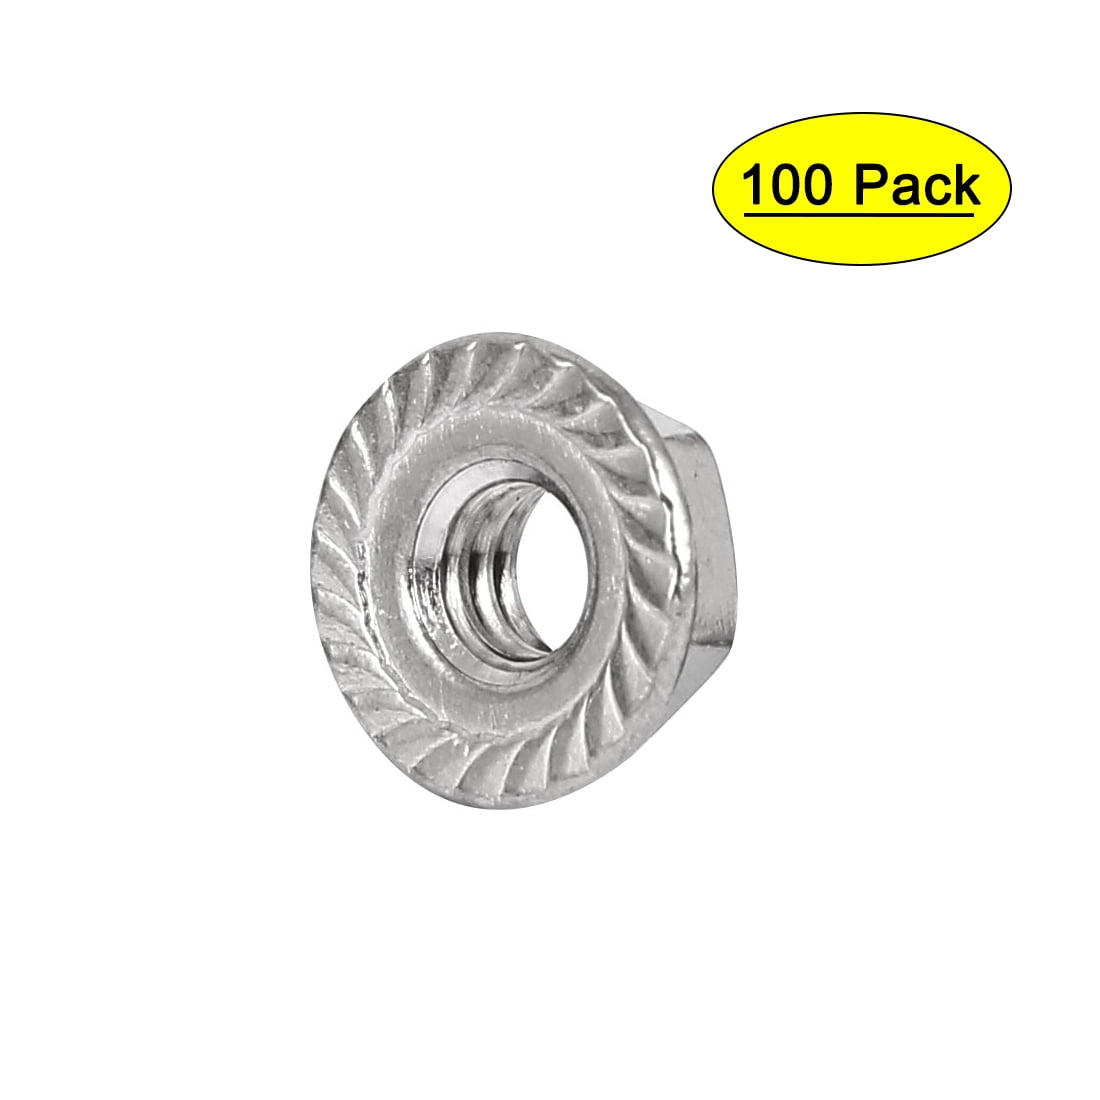 m8 serrated flanged nuts zink plated great for bikes garden or home jobs 20 pack 